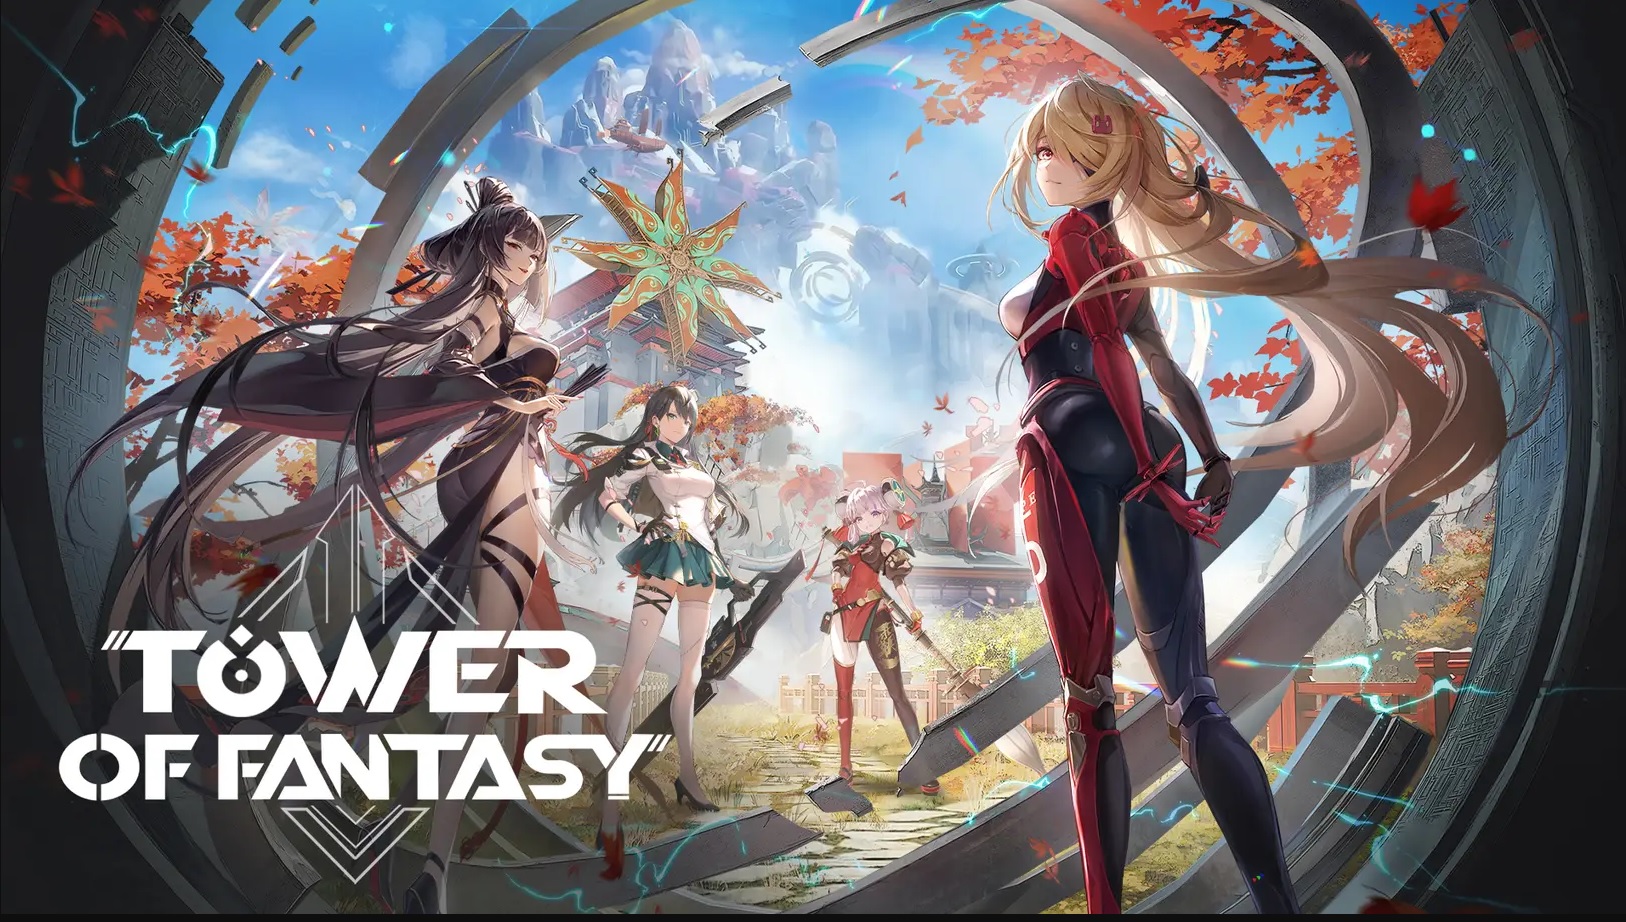 Genshin-like Tower of Fantasy launching on PlayStation August 8